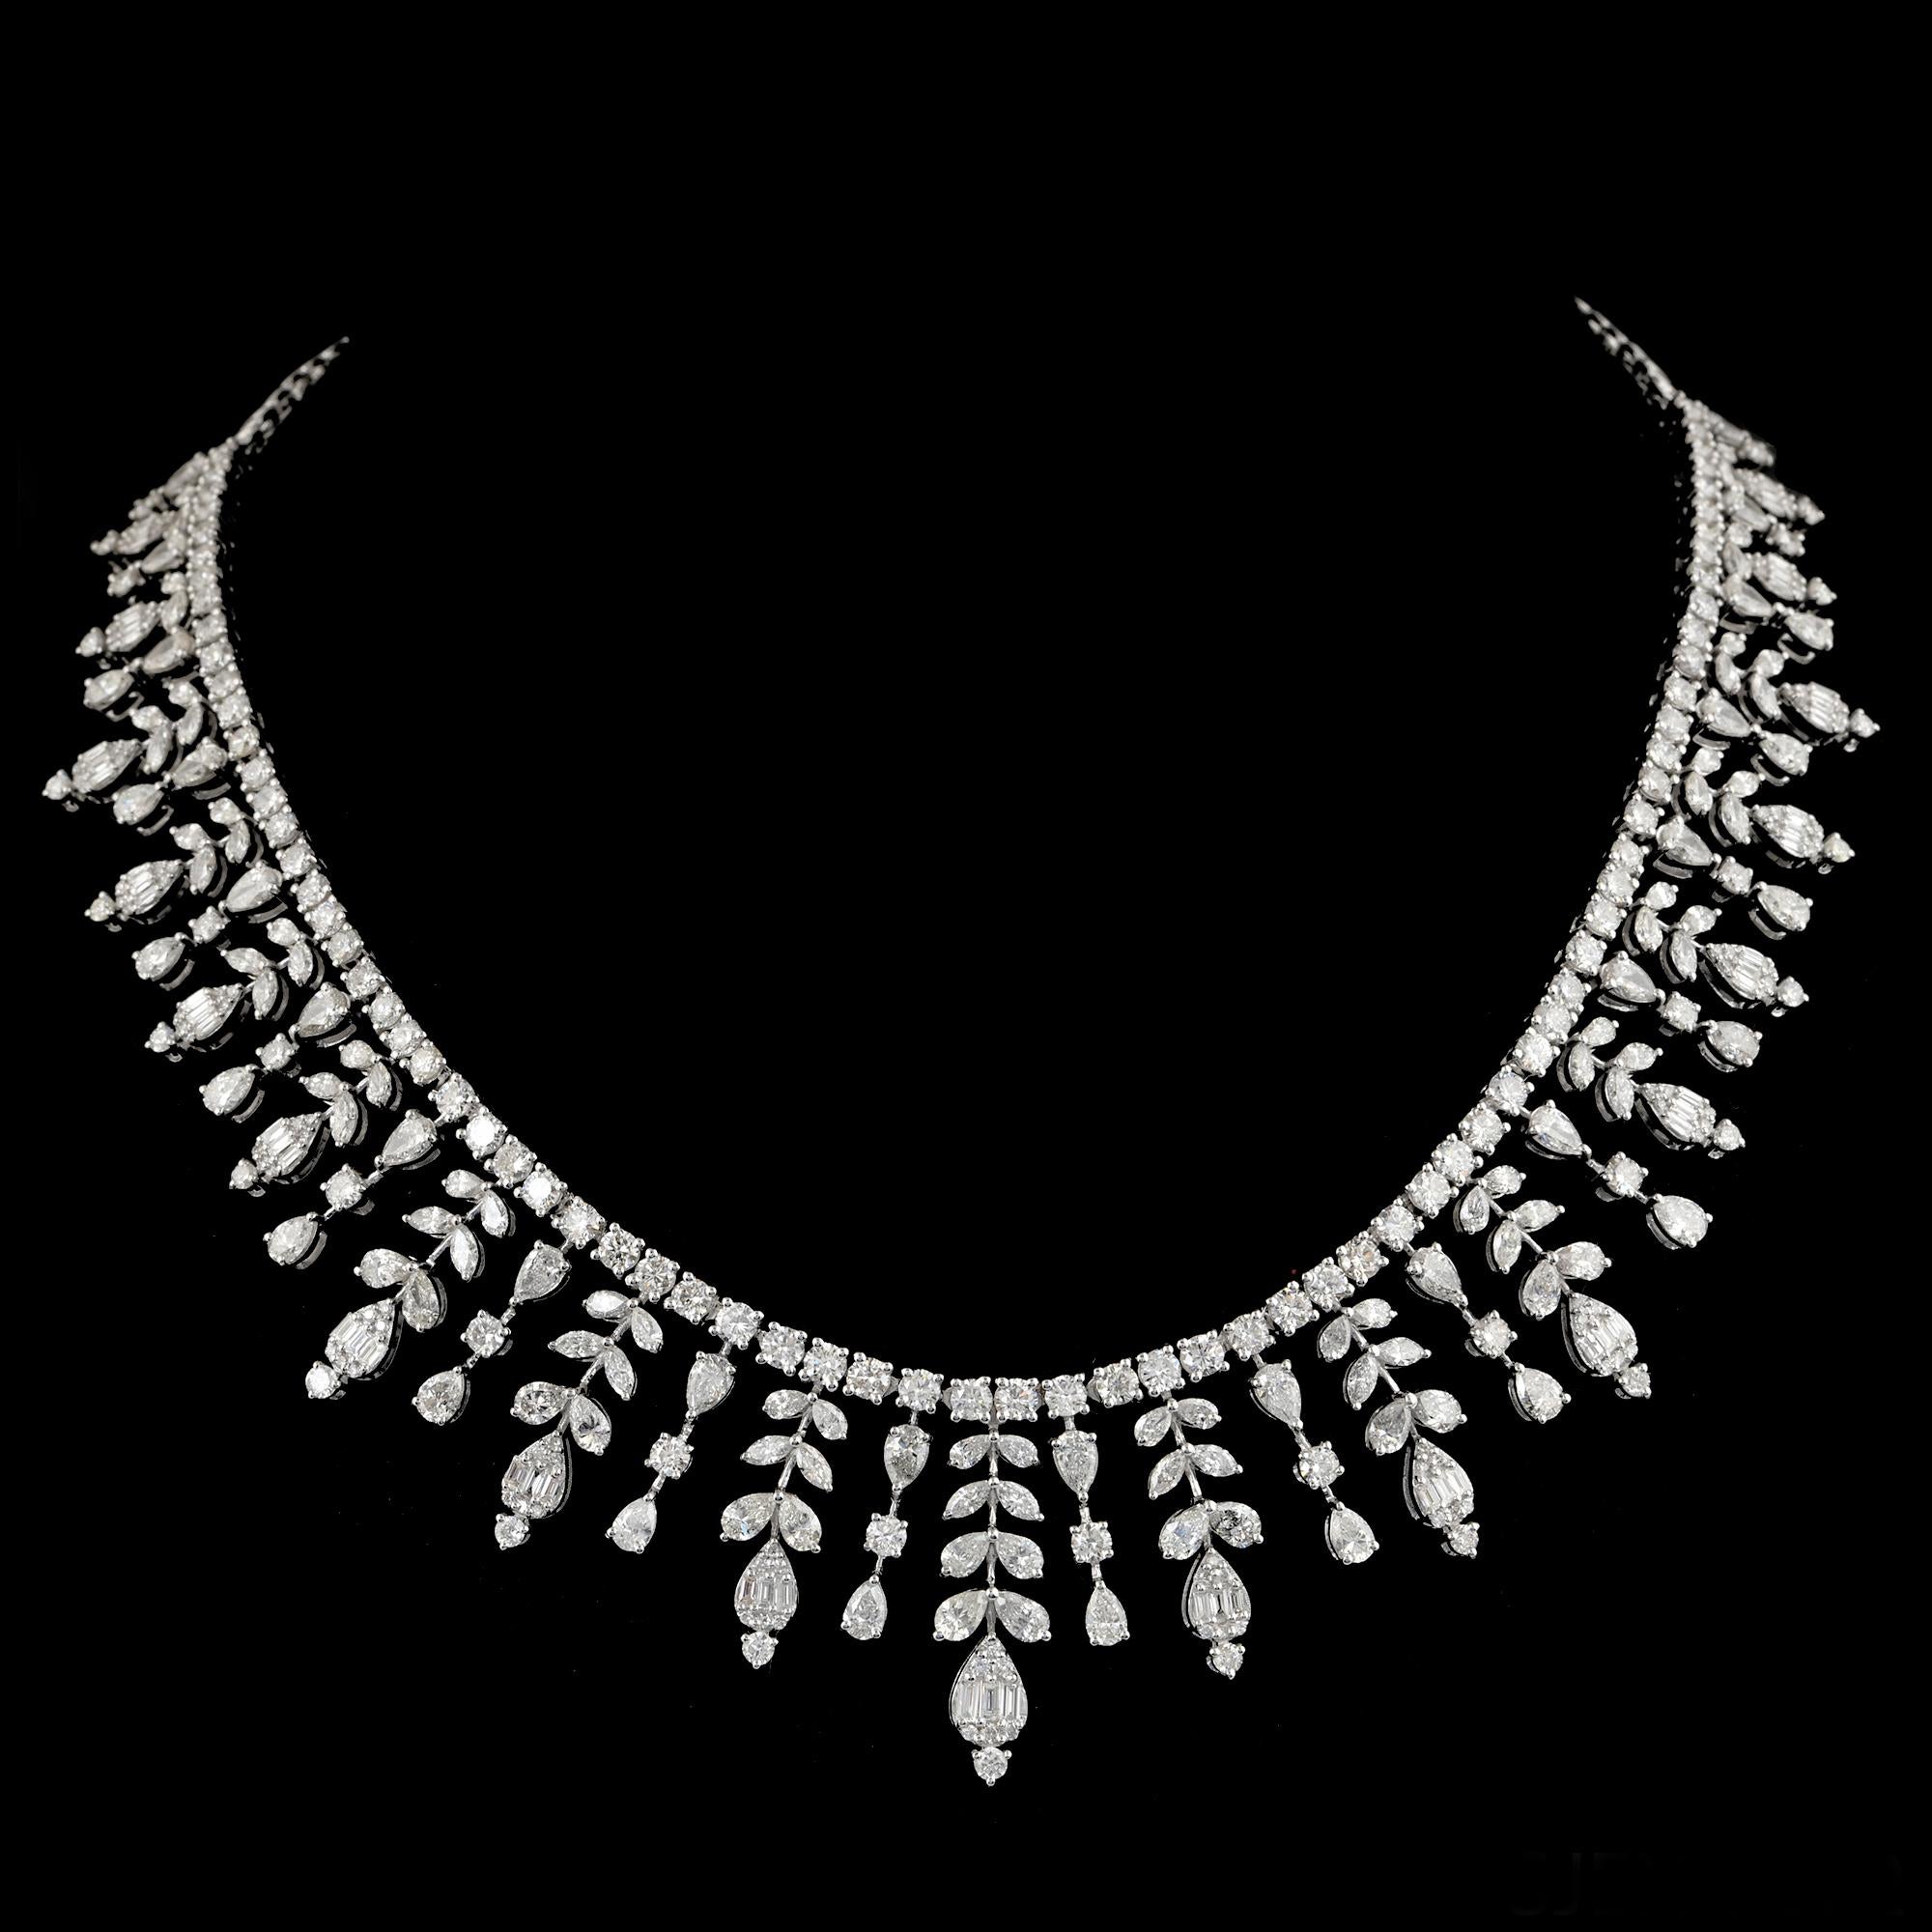 Enhance your jewelry collection with this exquisite handmade necklace featuring a stunning 21.01 carat diamond spike design, crafted in 18 karat white gold. This luxurious piece of jewelry is available exclusively on 1stdibs, offering a truly